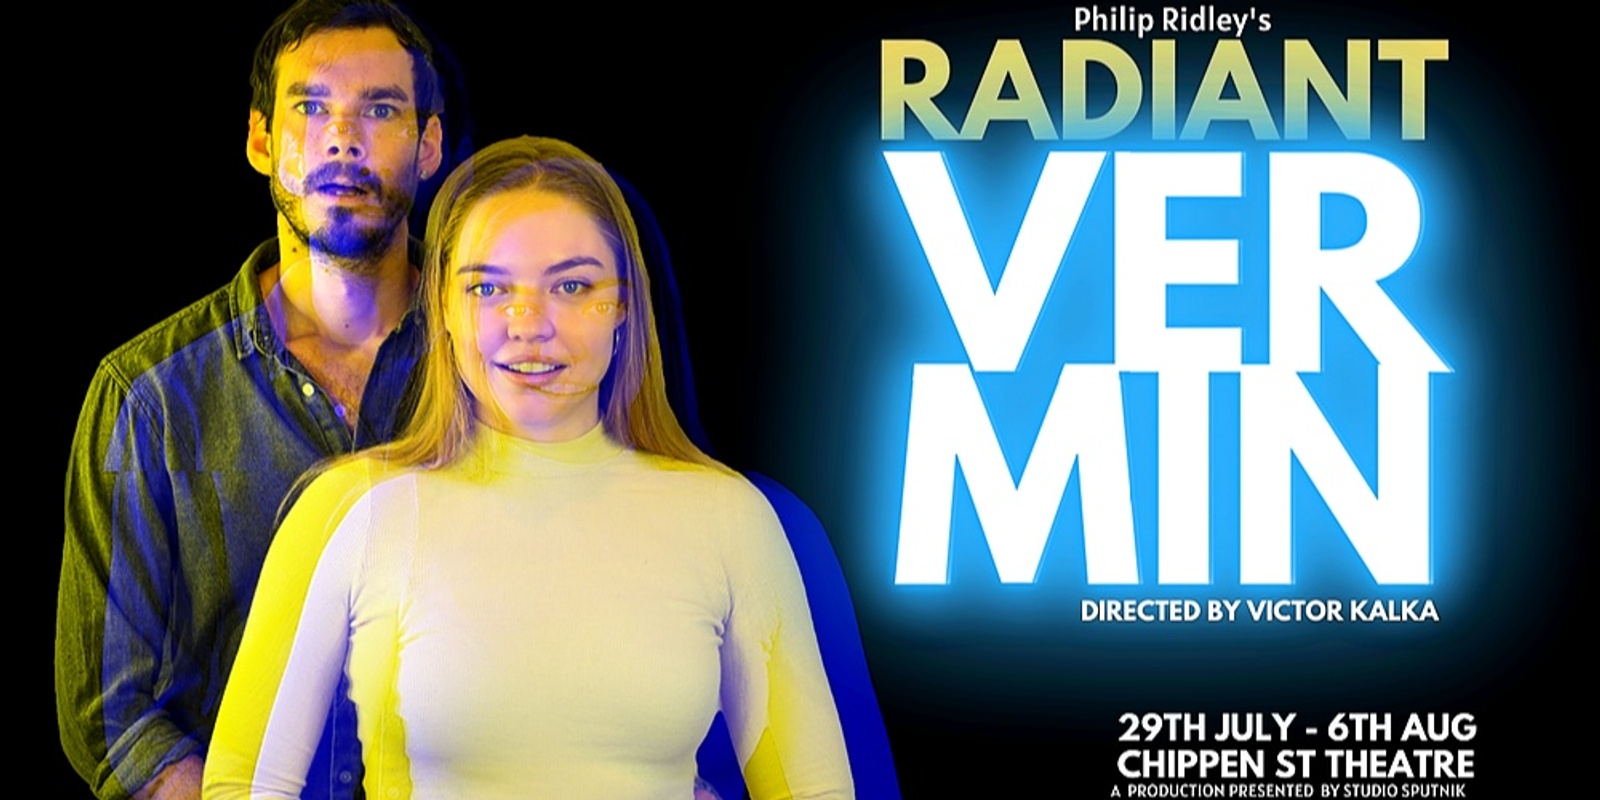 Banner image for Radiant Vermin by Philip Ridley 